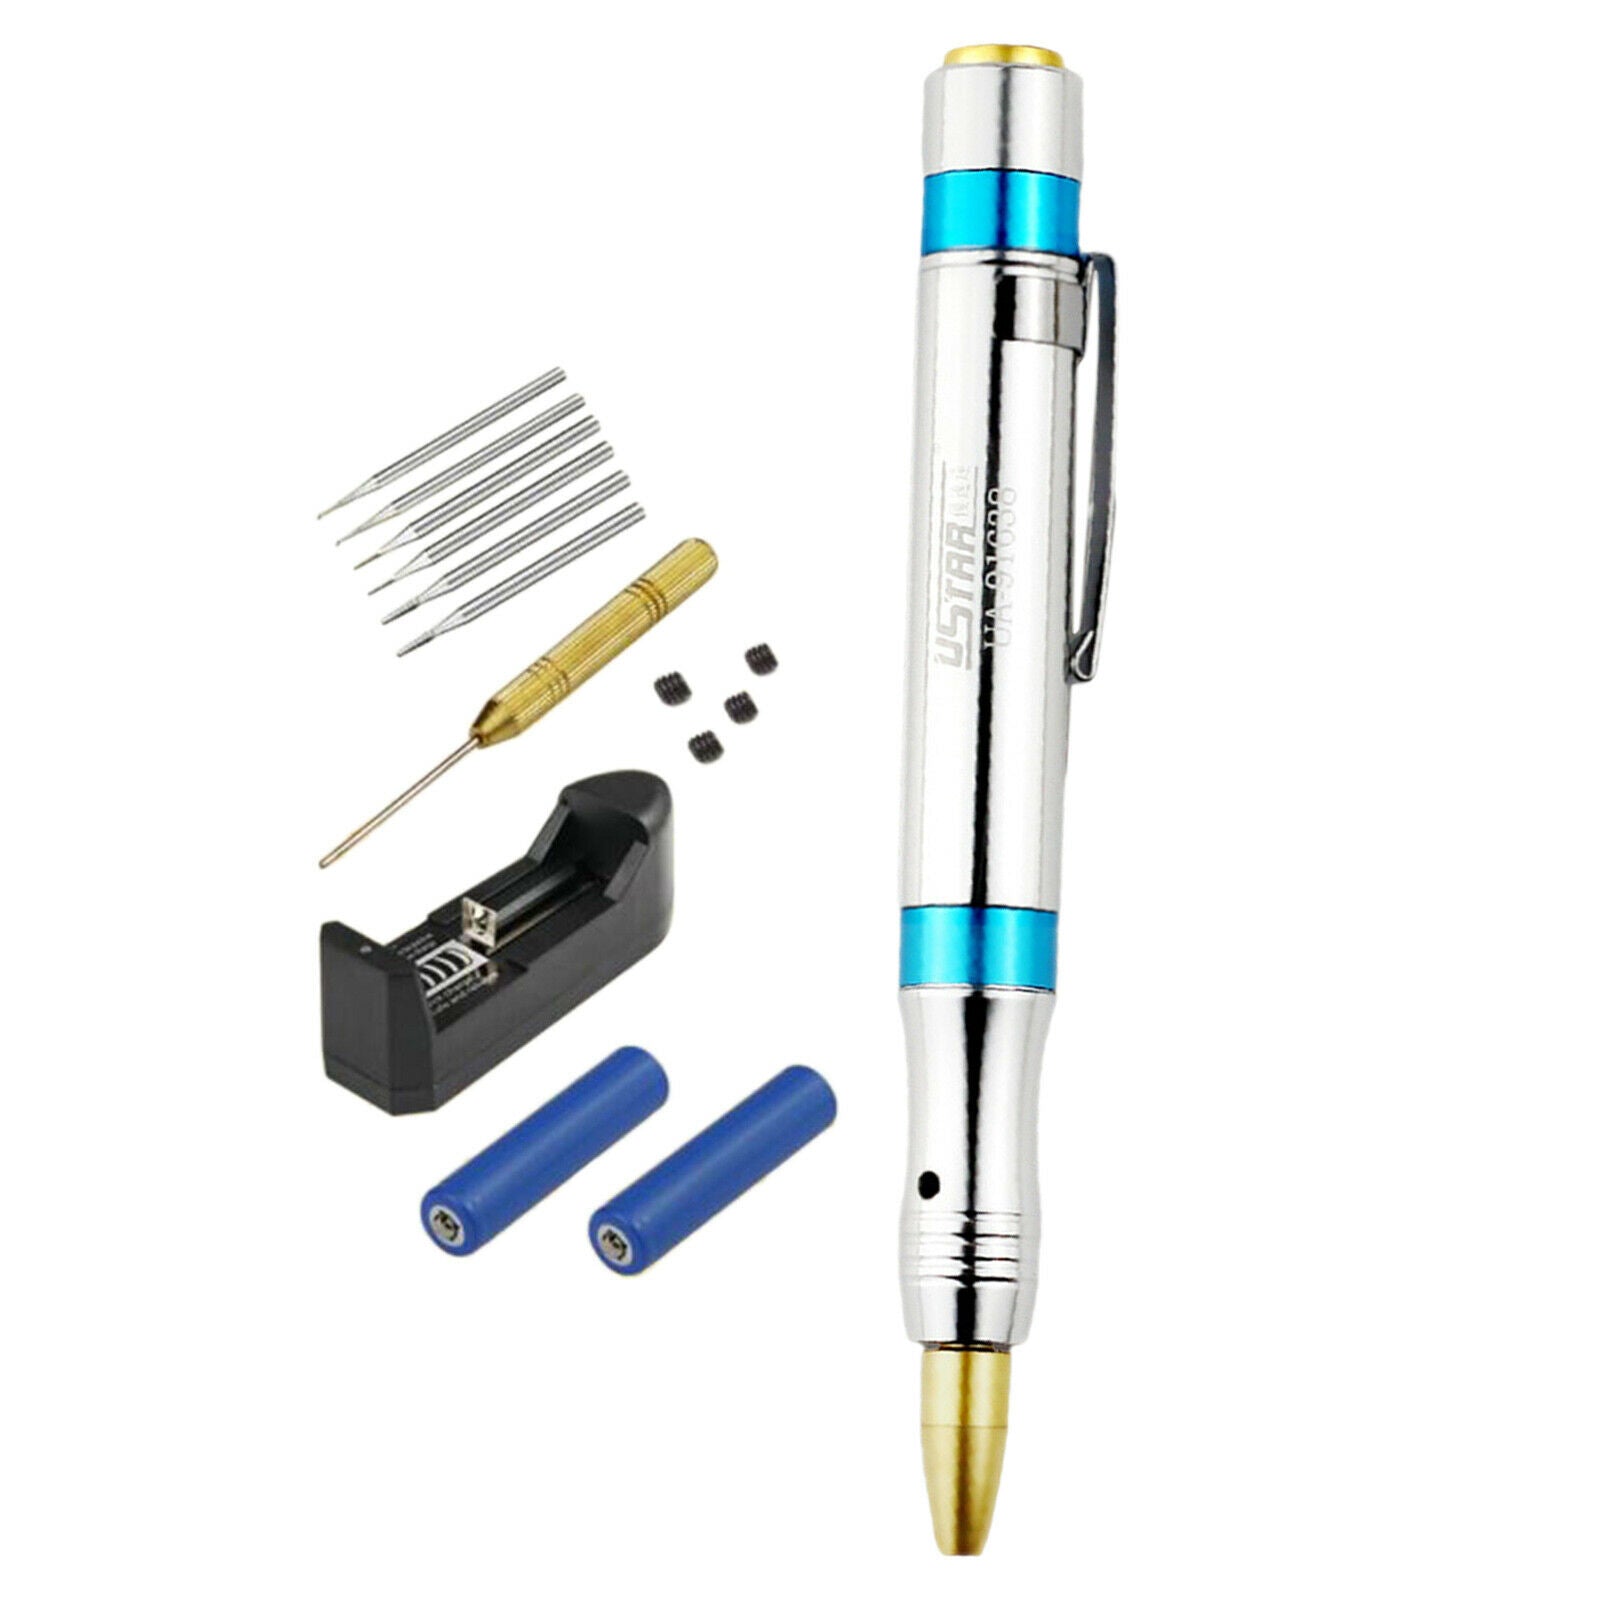 Portable Modeling Tool Lightweight Electric Grinder Pen for Hobby Arts